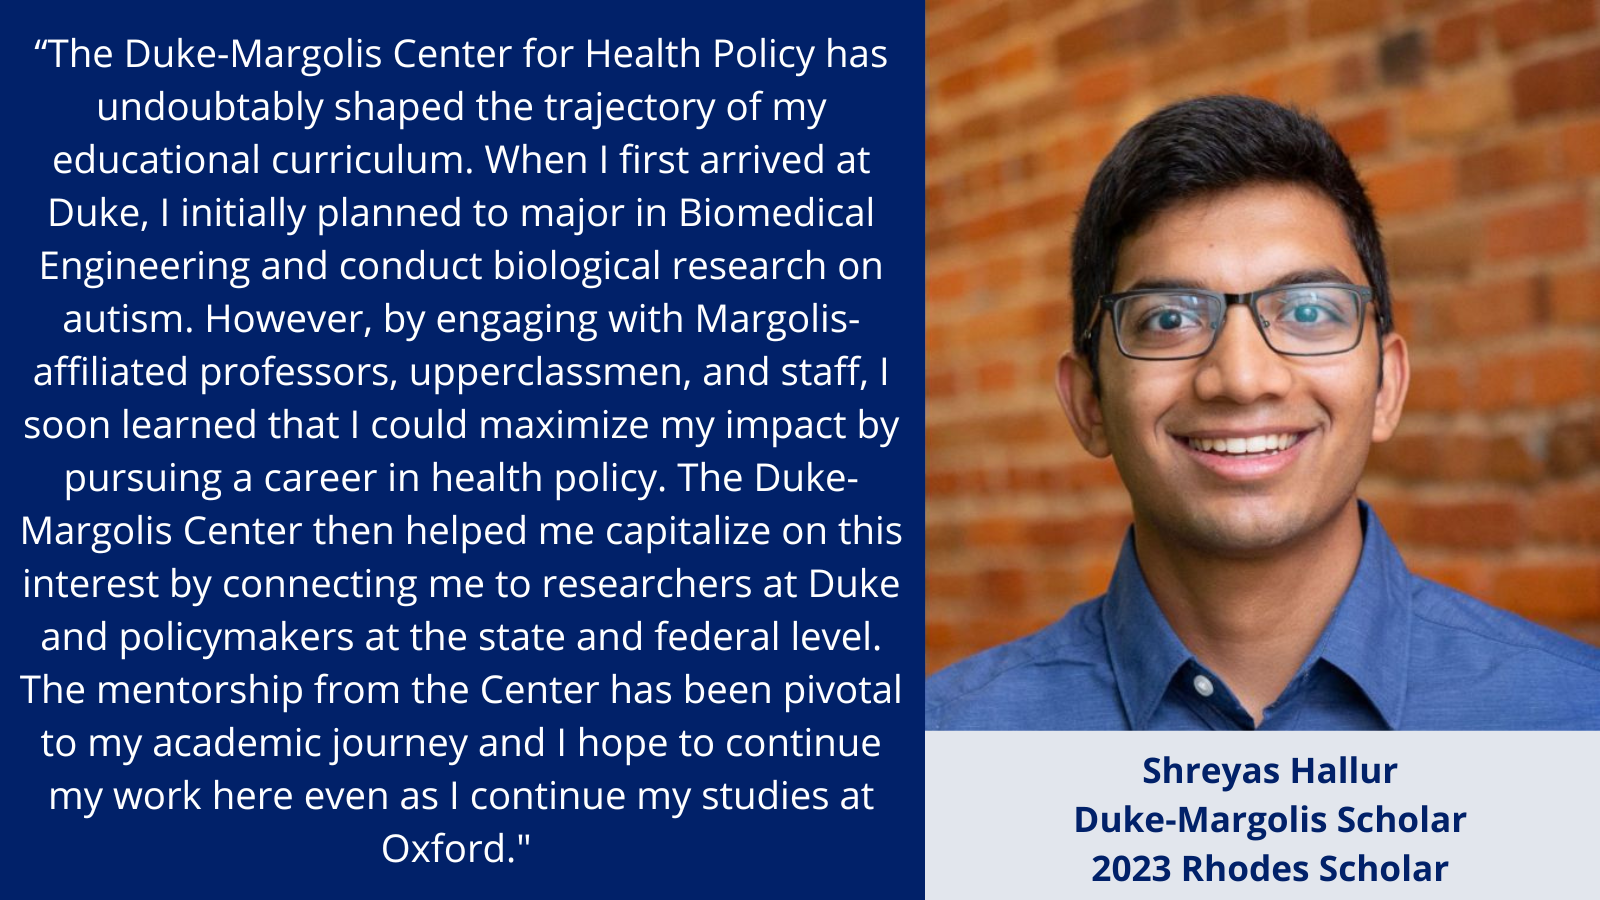 “The Duke-Margolis Center for Health Policy has undoubtably shaped the trajectory of my educational curriculum. When I first arrived at Duke, I initially planned to major in Biomedical Engineering and conduct biological research on autism. However, by engaging with Margolis-affiliated professors, upperclassmen, and staff, I soon learned that I could maximize my impact by pursuing a career in health policy. The Duke-Margolis Center then helped me capitalize on this interest by connecting me to researchers at Duke and policymakers at the state and federal level. The mentorship from the Center has been pivotal to my academic journey and I hope to continue my work here even as I continue my studies at Oxford." 